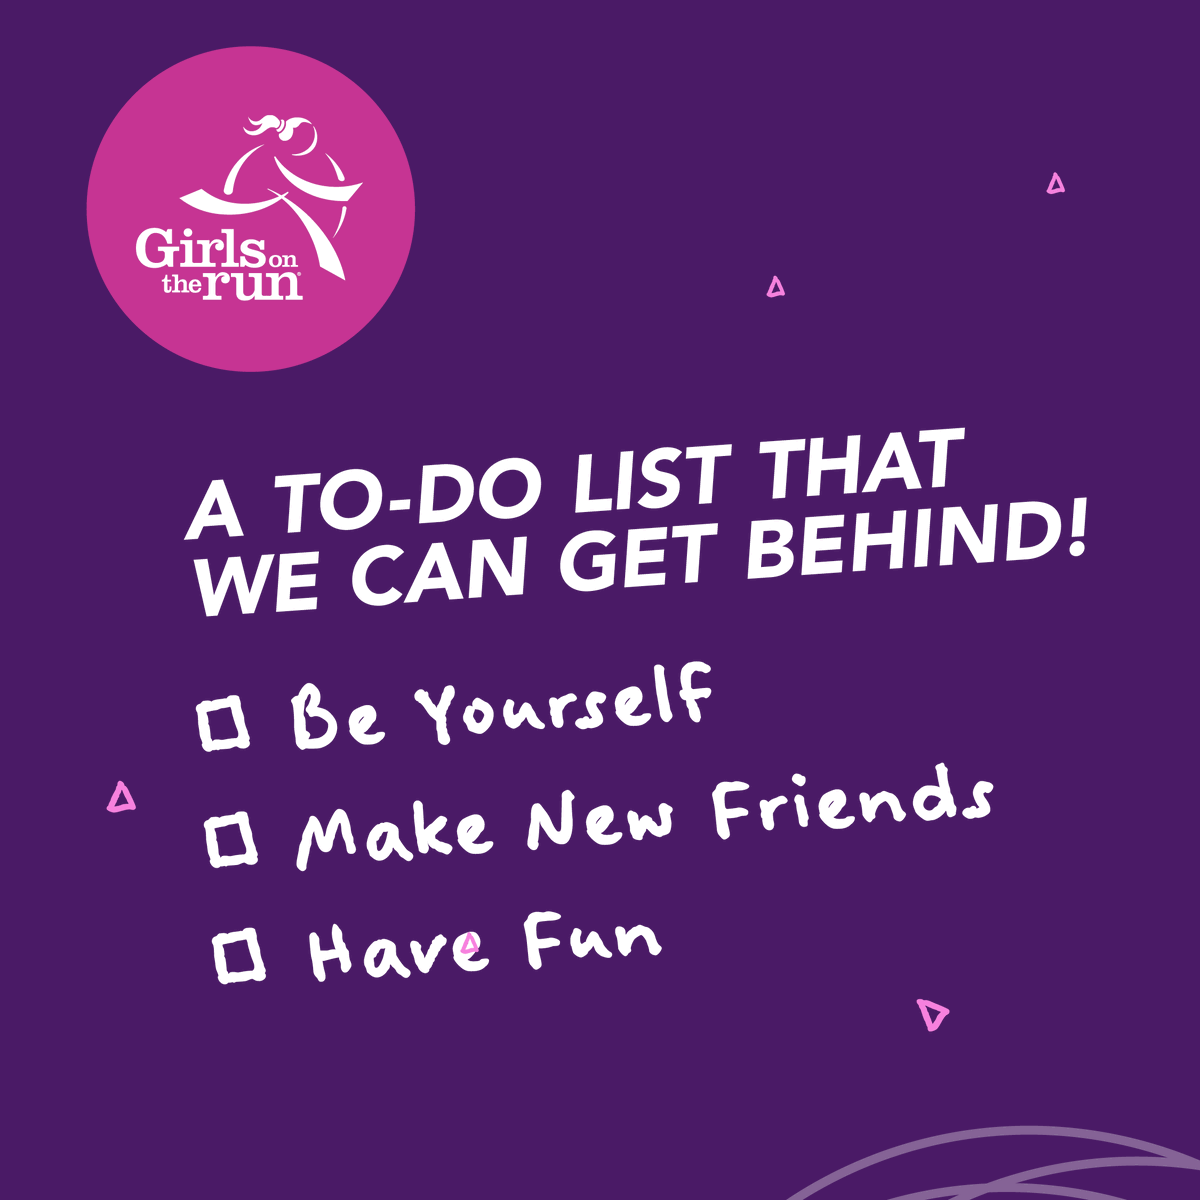 At Girls on the Run, we encourage our girls to always be themselves and have fun in an environment that fosters new friendships. 'There is always room in the heart for one more friend.' - Anonymous